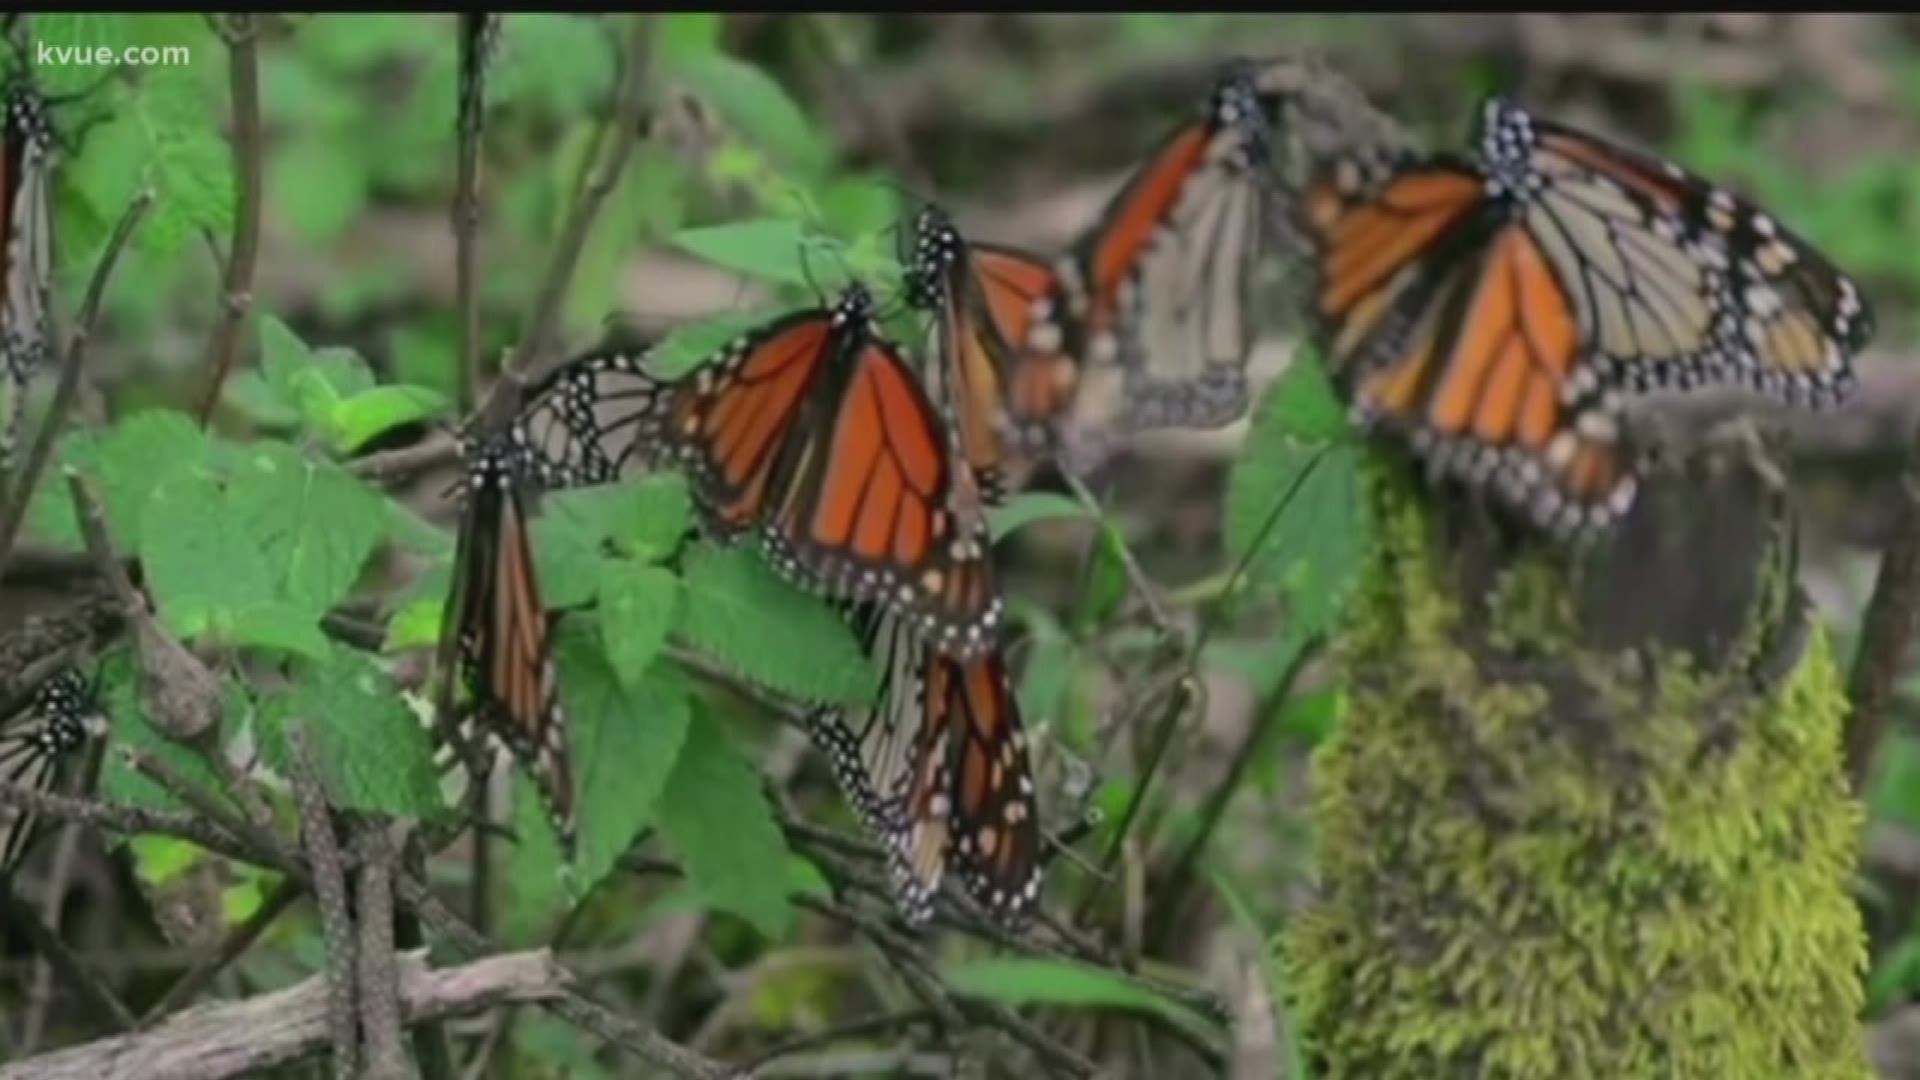 You could soon see thousands – maybe millions – of monarch butterflies flying around Austin. This year, Texas is expected to have one of the largest butterfly migrations in recent history.